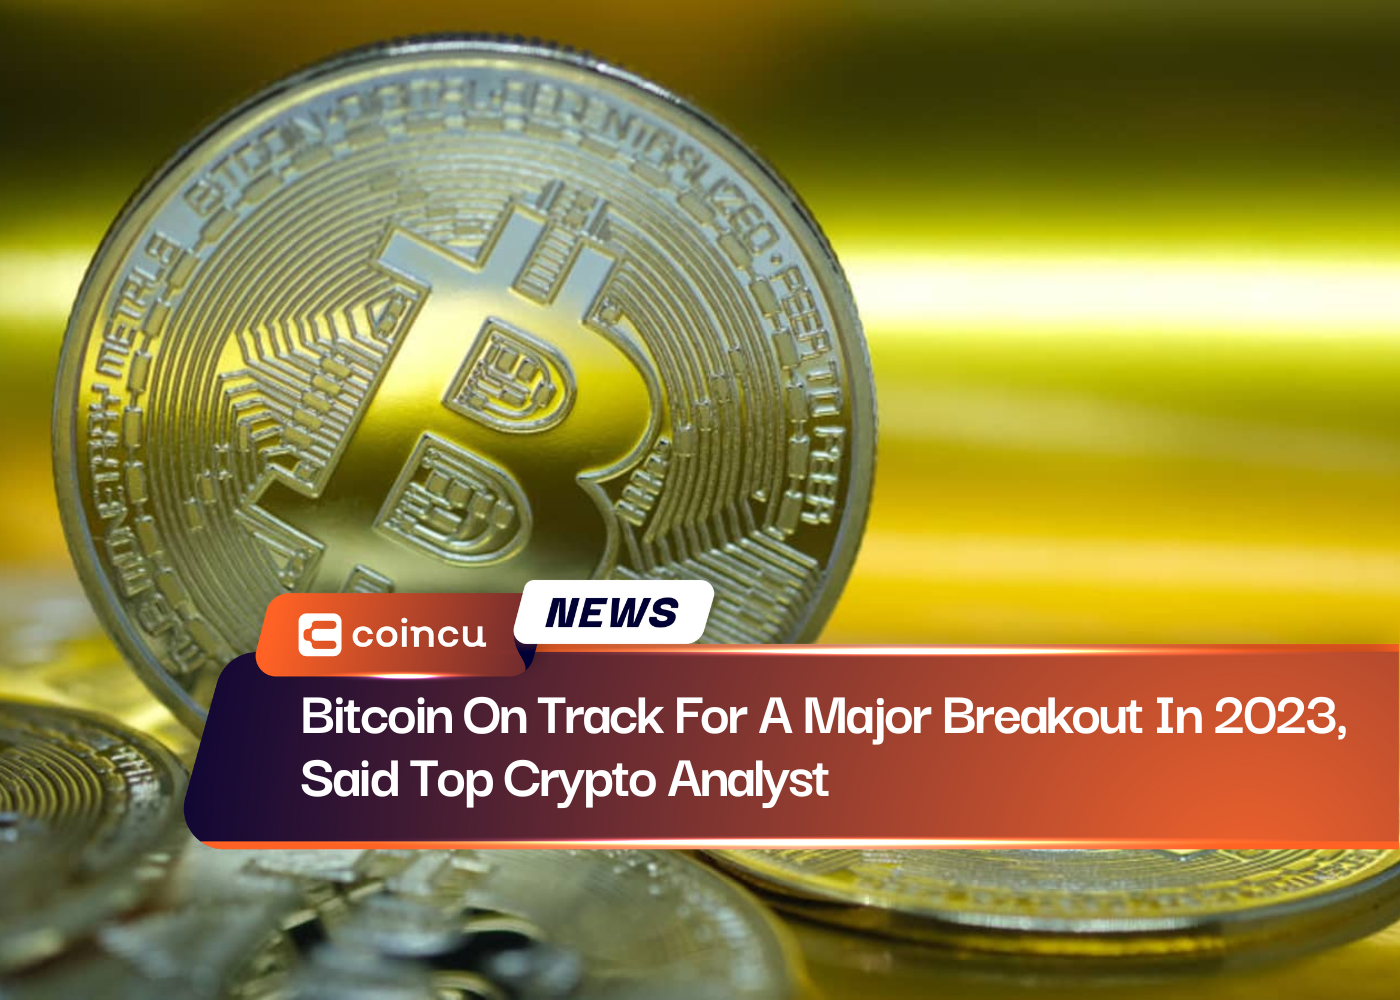 Bitcoin On Track For A Major Breakout In 2023, Said Top Crypto Analyst